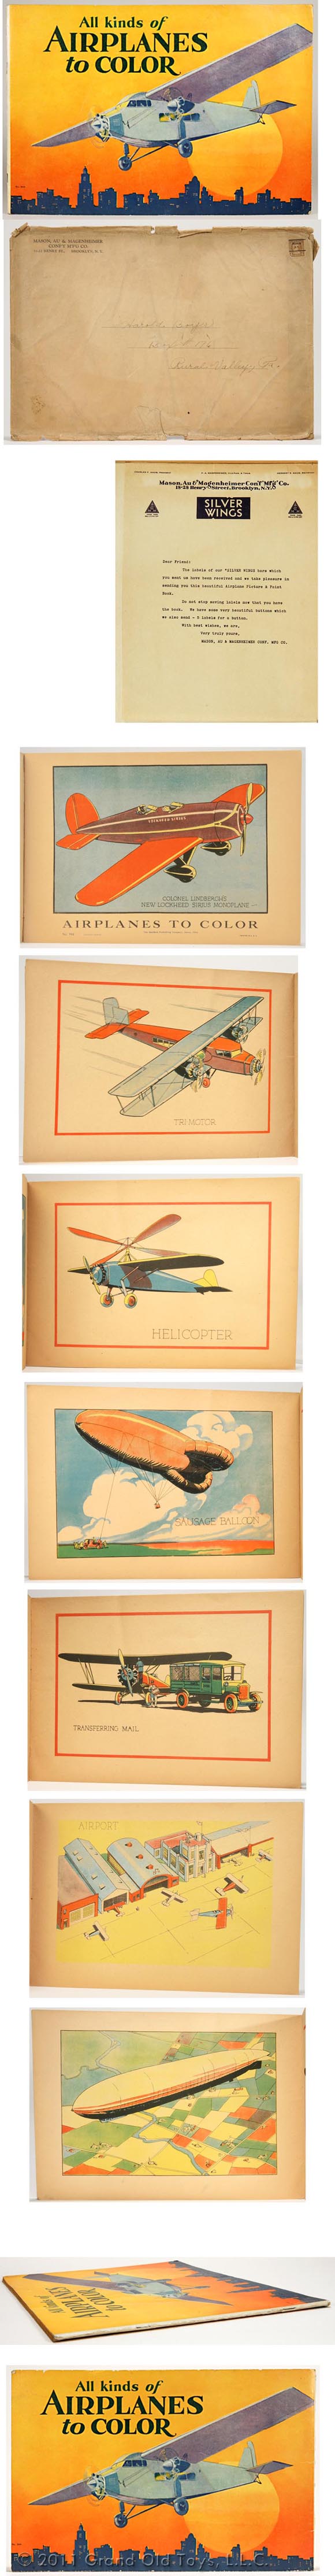 1930 Saalfield, 24pg All Kinds Of Airplanes To Color